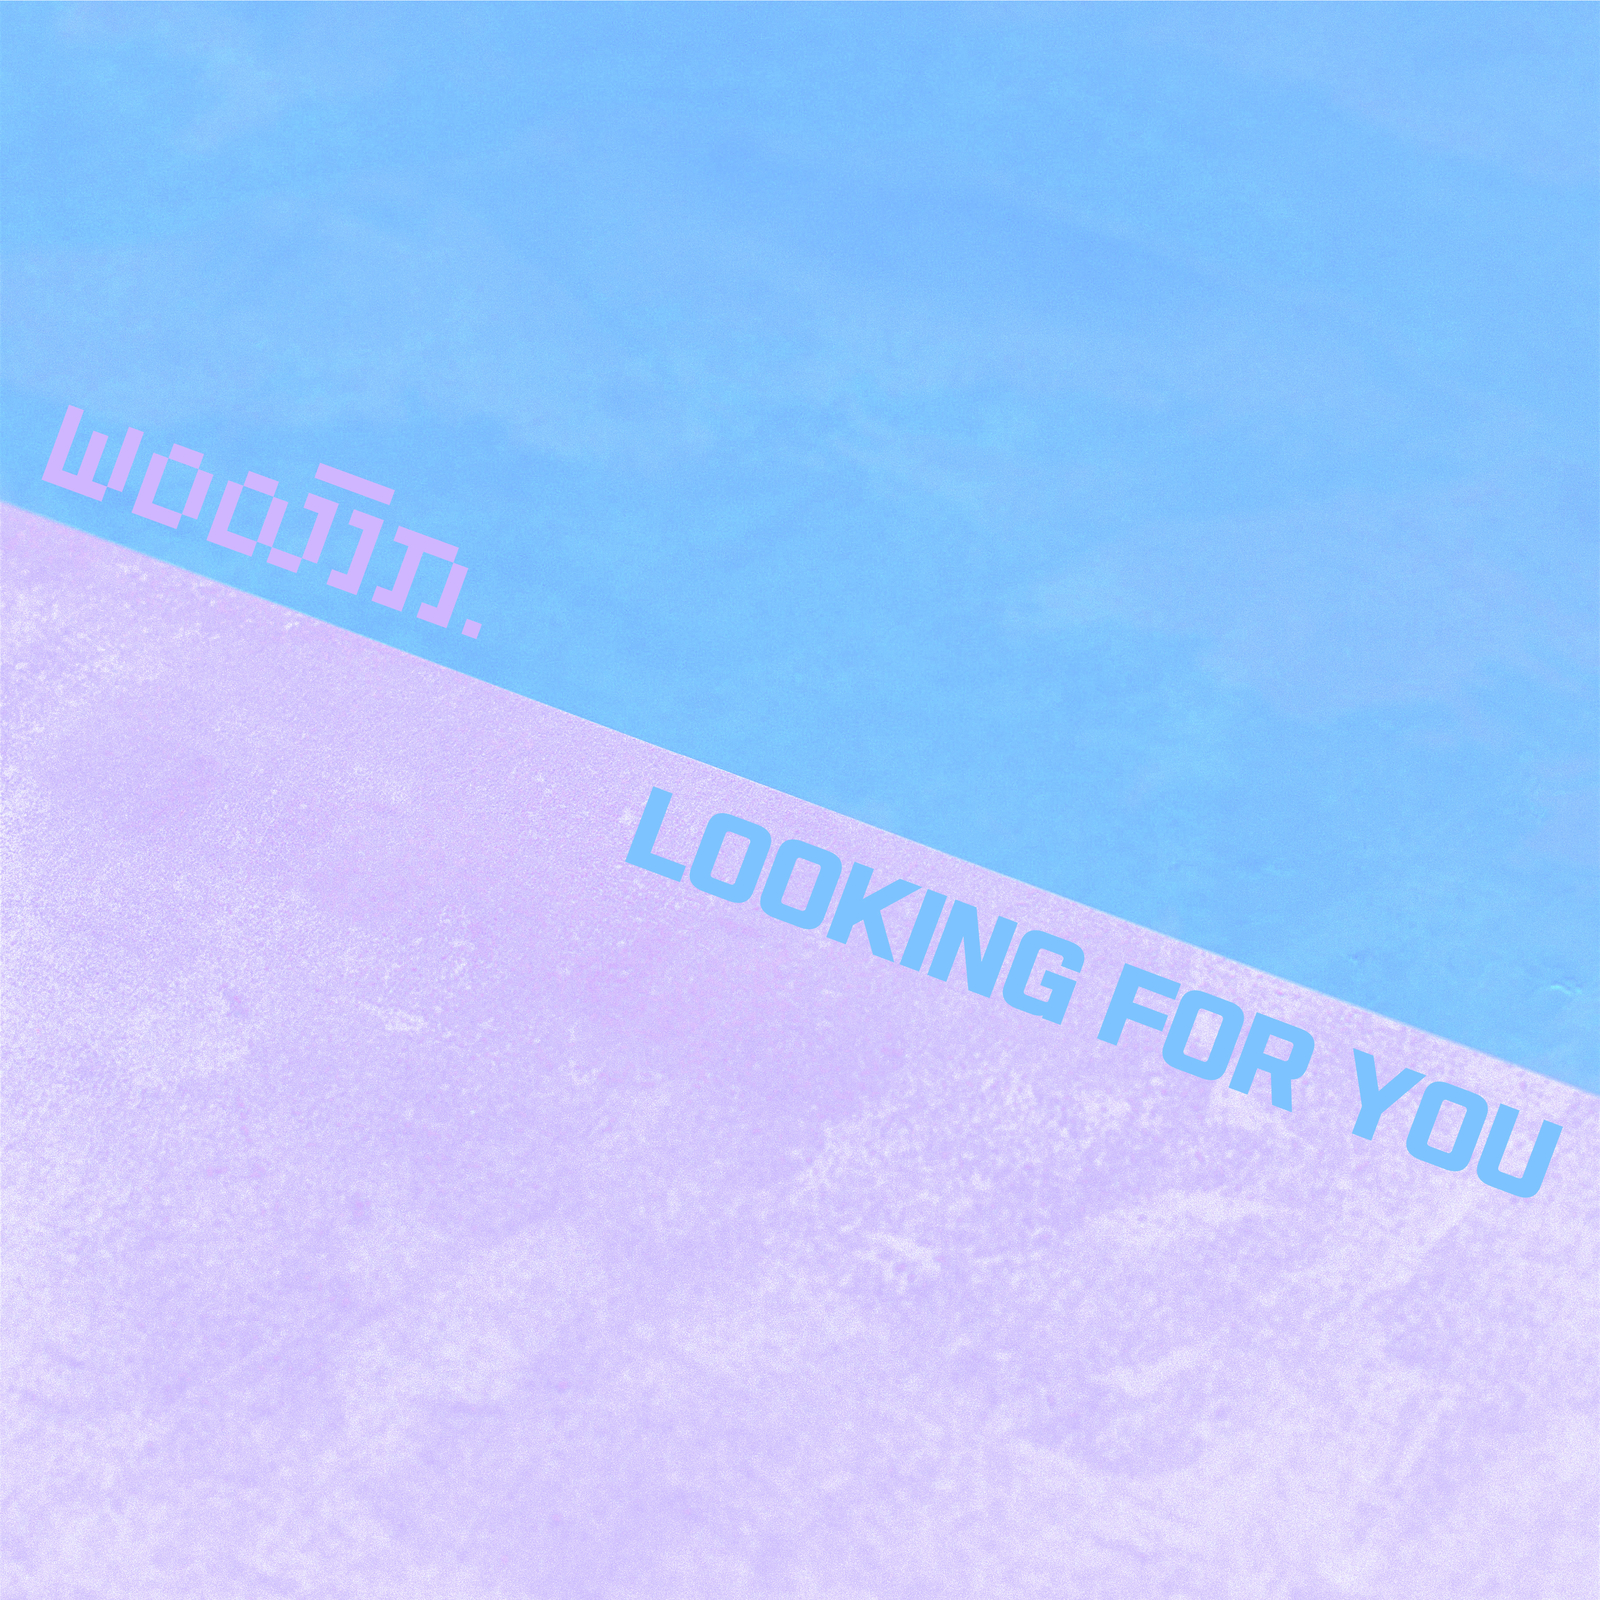 Looking For You